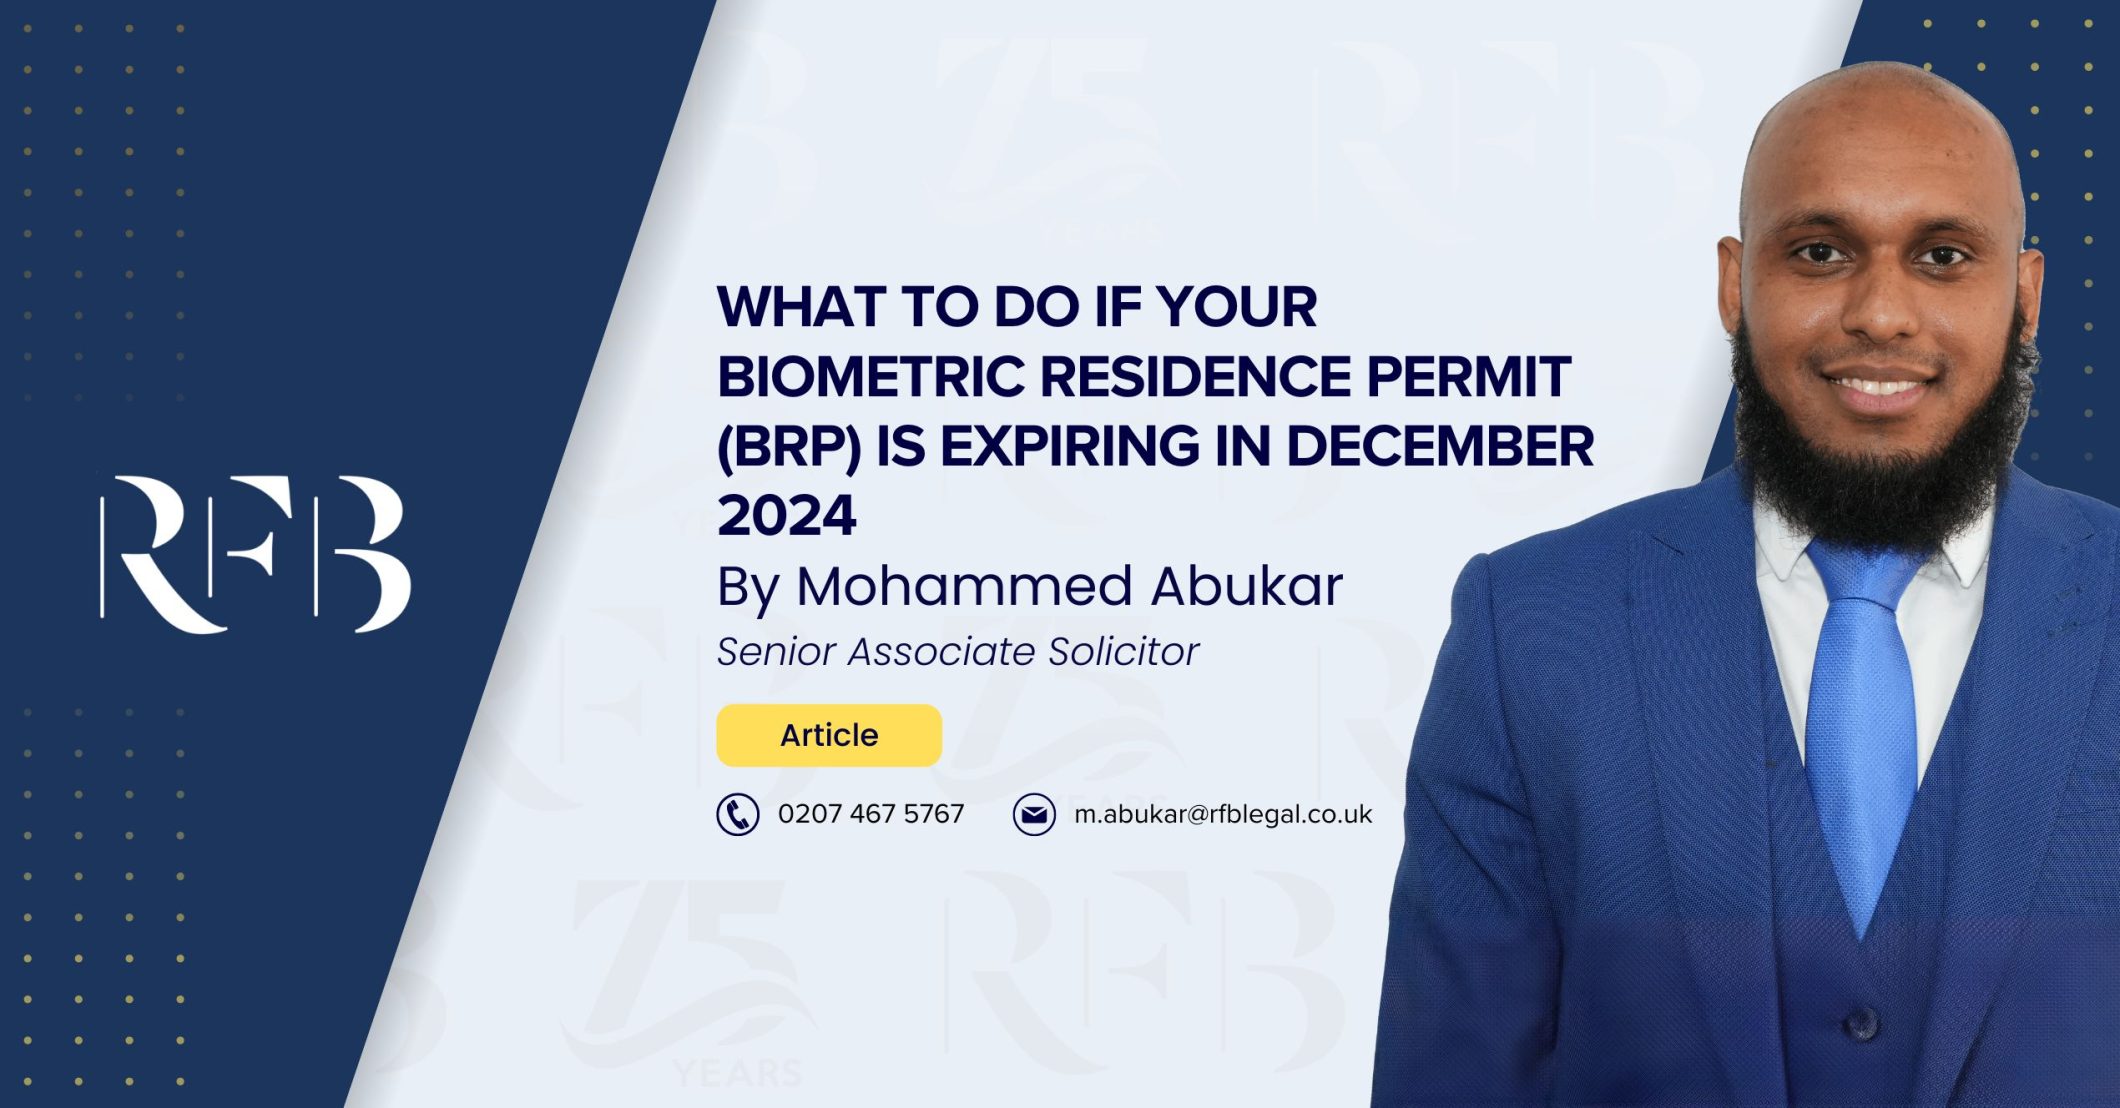 Cover for the article "What to Do if Your Biometric Residence Permit (BRP) is Expiring in December 2024" featuring Author Mohammed Abukar